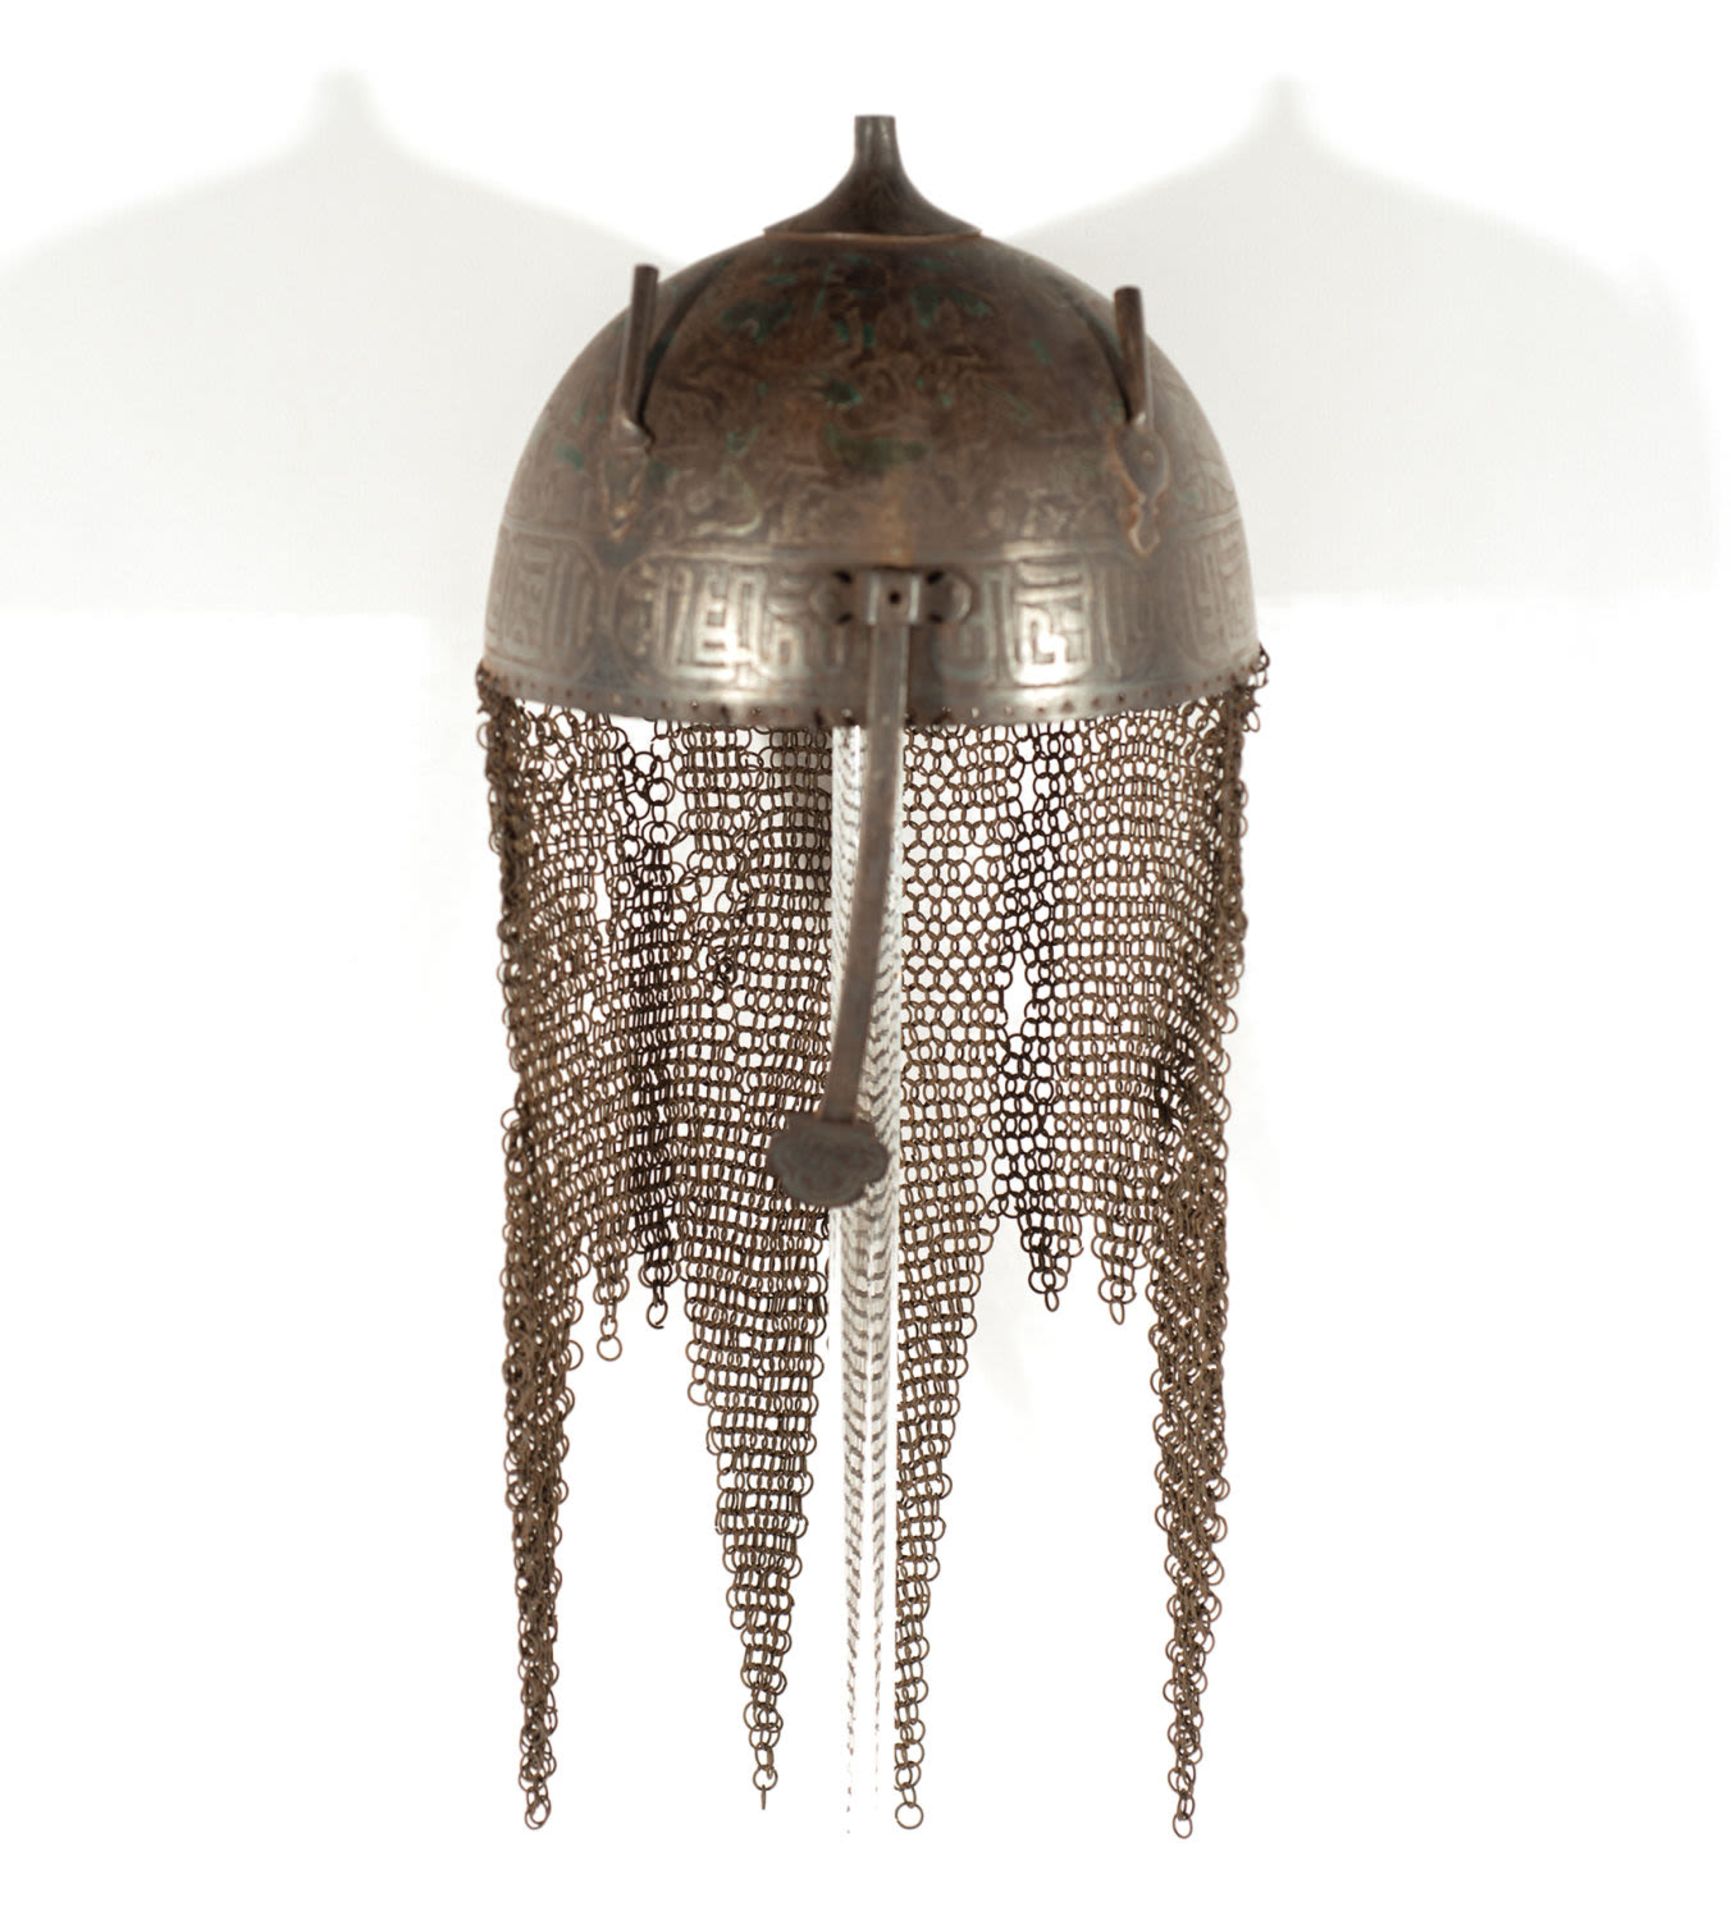 "Kulah Khud" Helmet of a Persian or Mughal Infantry Soldier, Central Asia, 18th - 19th century